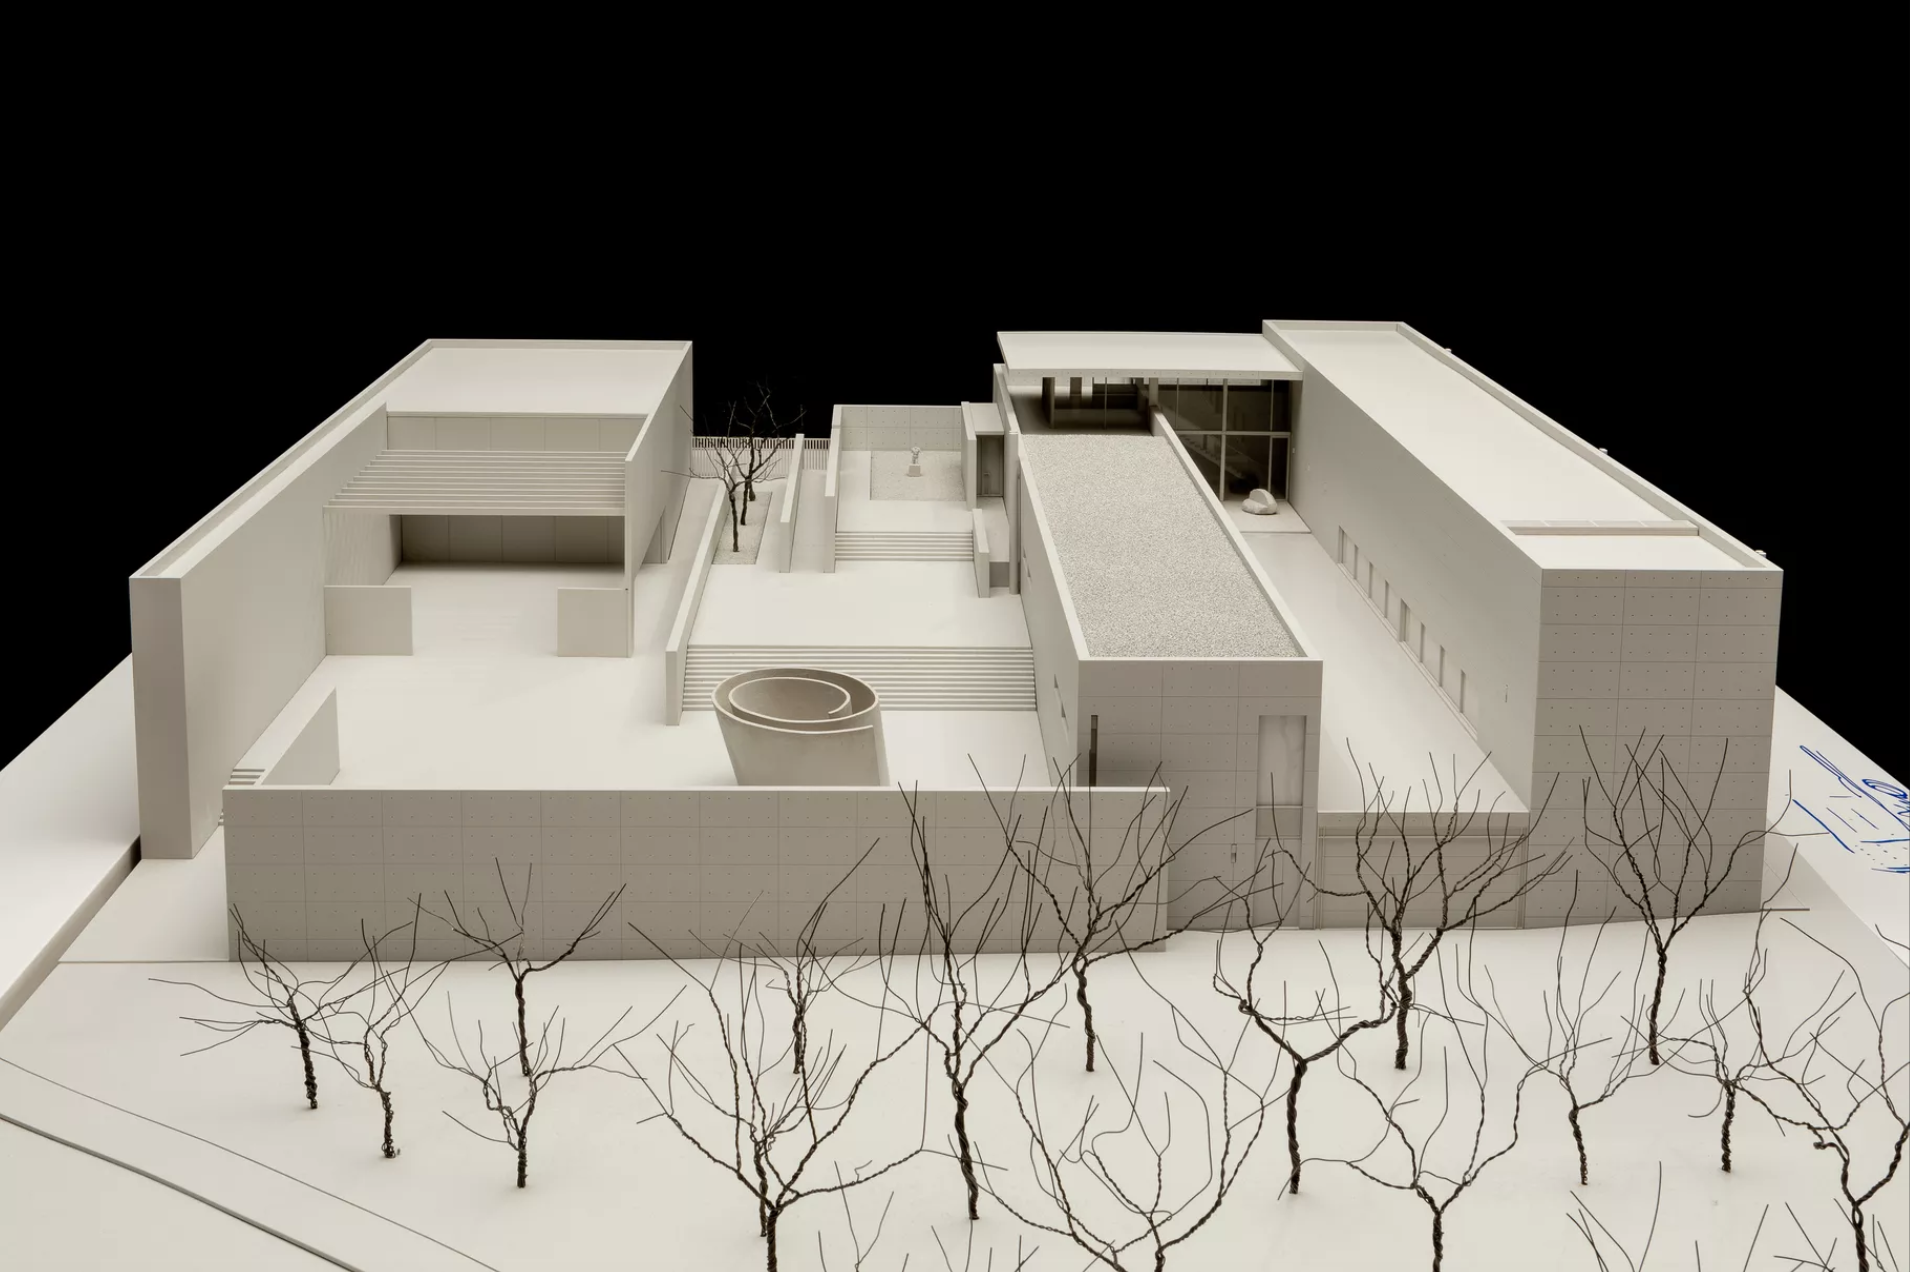 A scale model of a rectangular building with a multilevel roof and cut-outs, creating interior courtyards. 